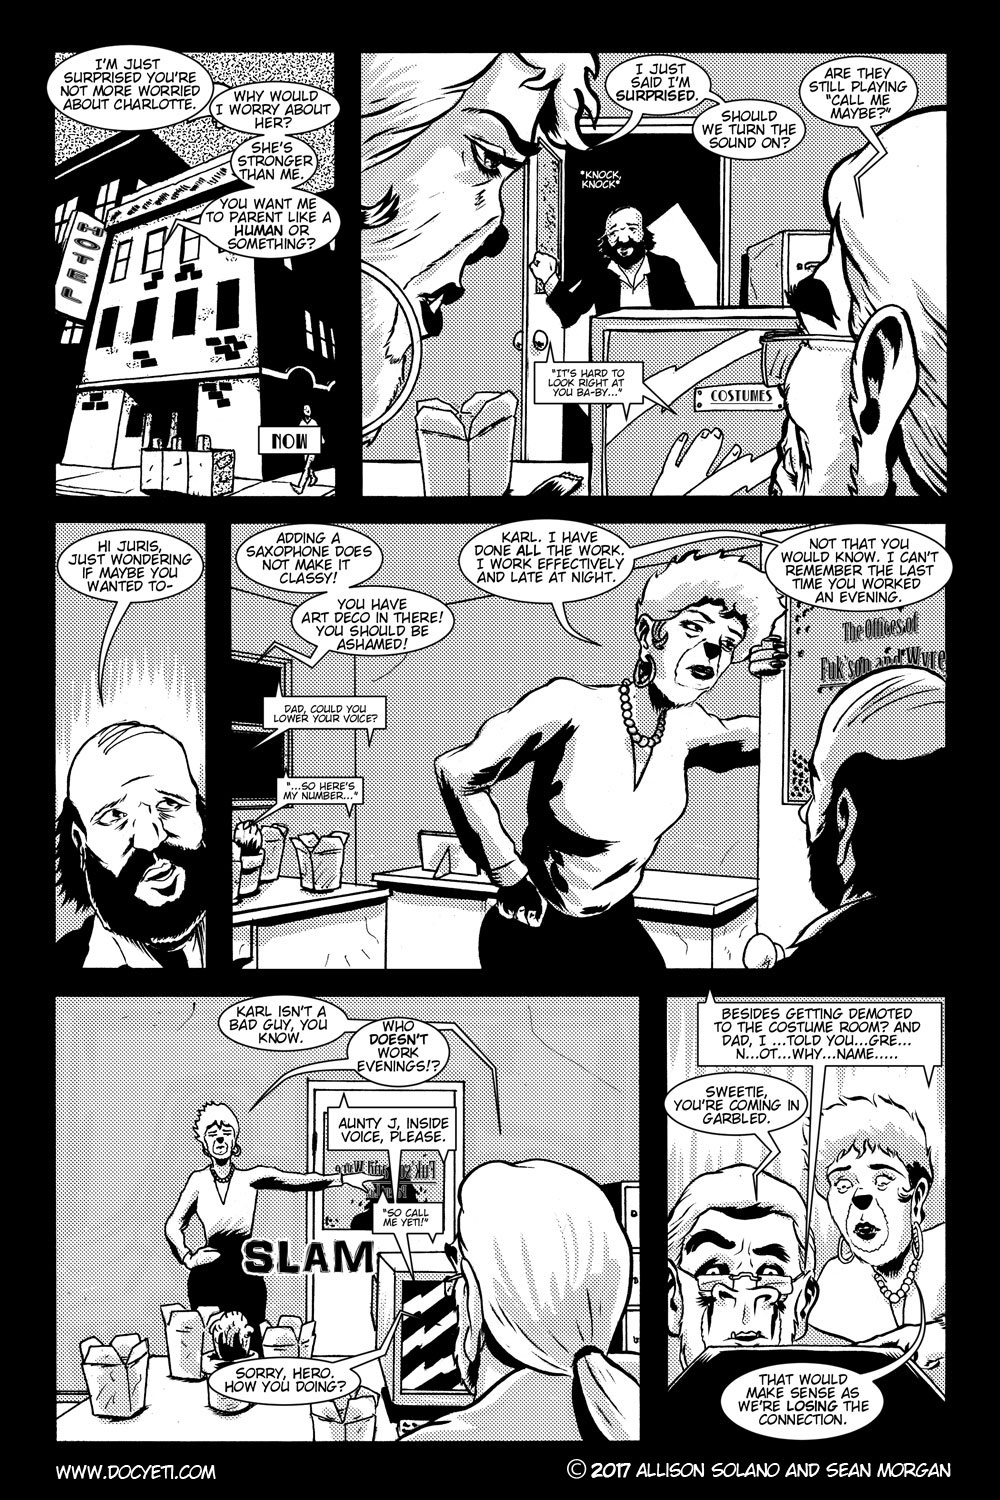 This Yeti for Hire! or the Yeti with the Lace Kerchief! Issue 2 pg.2